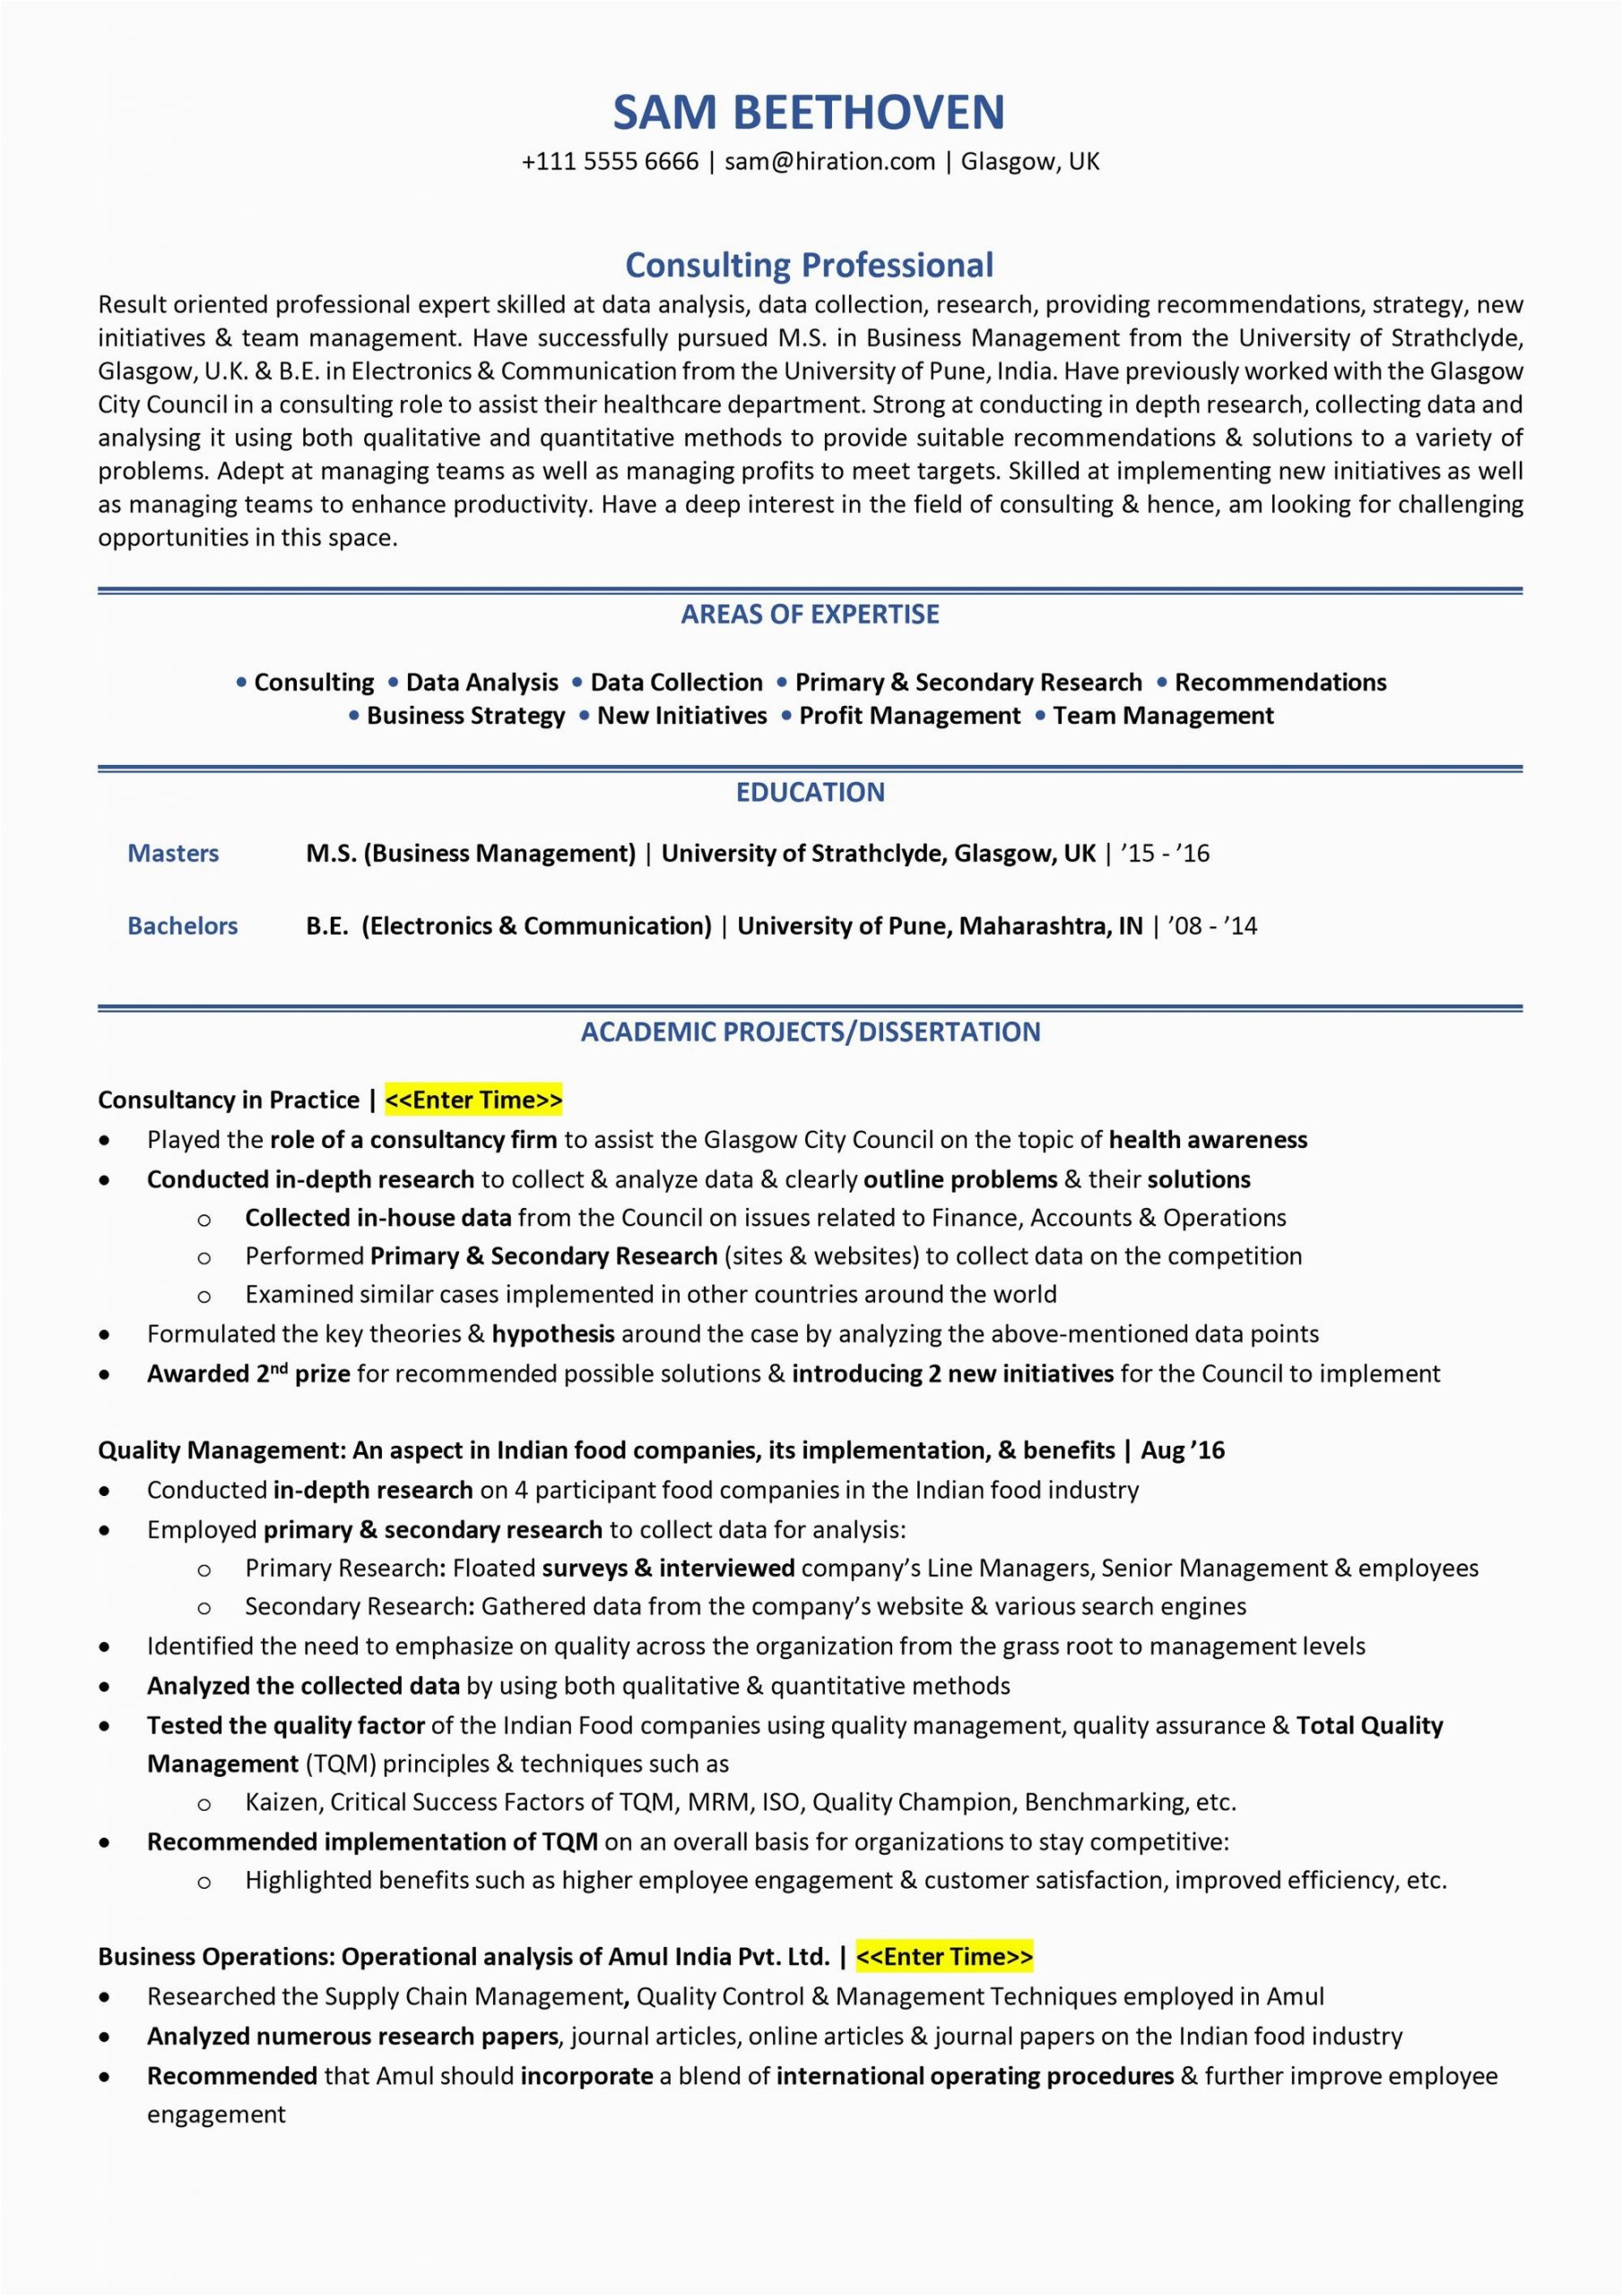 Resume Sample for A College Student Student Resume [2019] Guide to College Student Resume